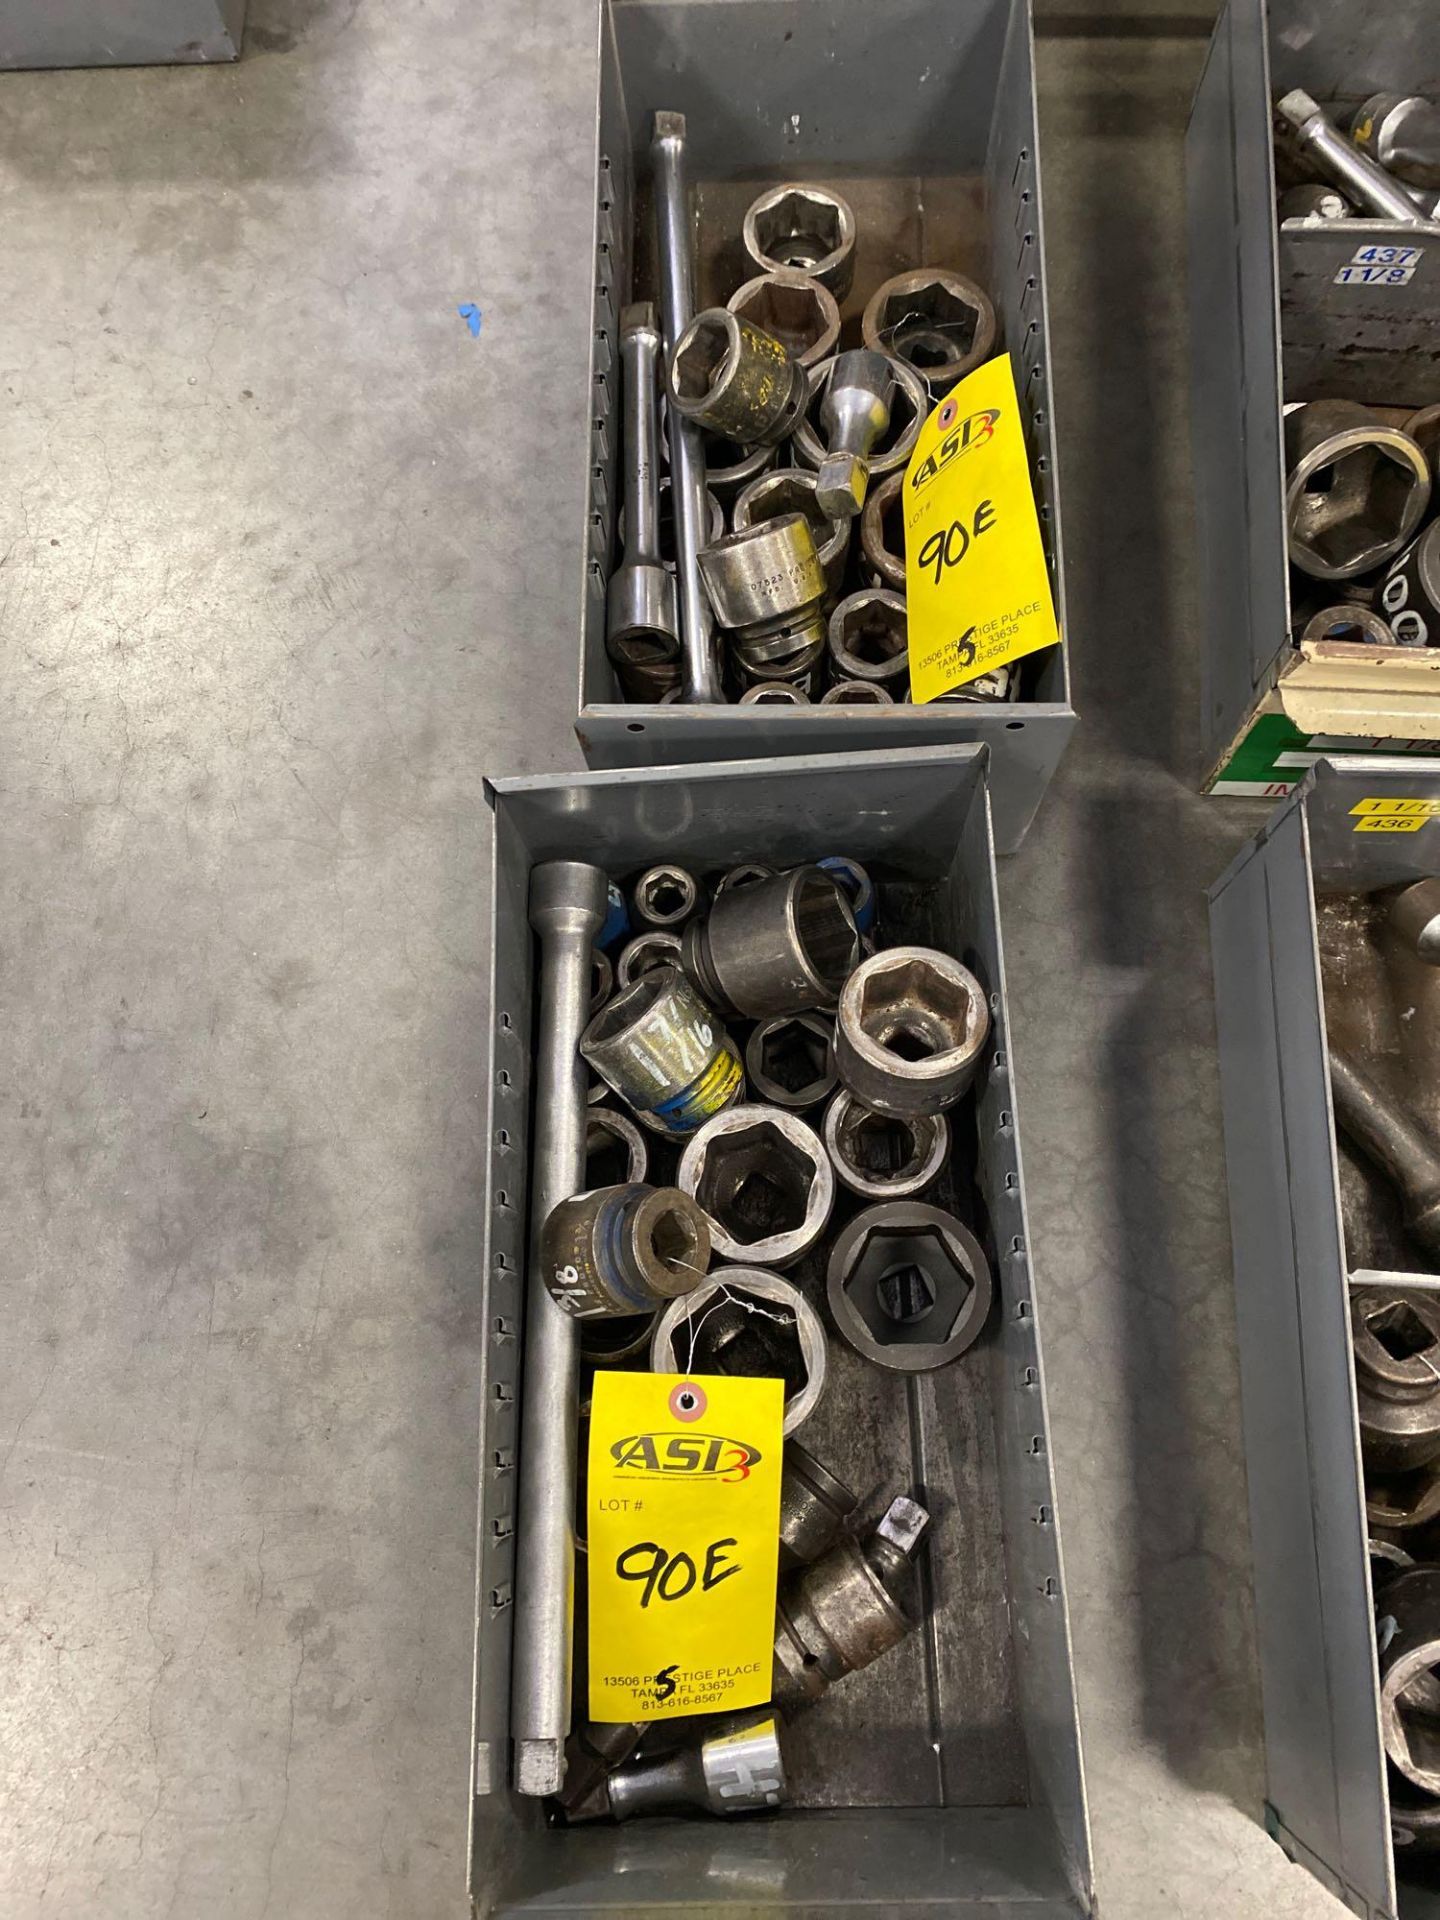 3/4" DRIVE IMPACT SOCKETS, MOSTLY PROTO, SOME WILLIAMS OR SNAP ON BRAND,SIZES FROM 5/8"- 2", 2 TRAYS